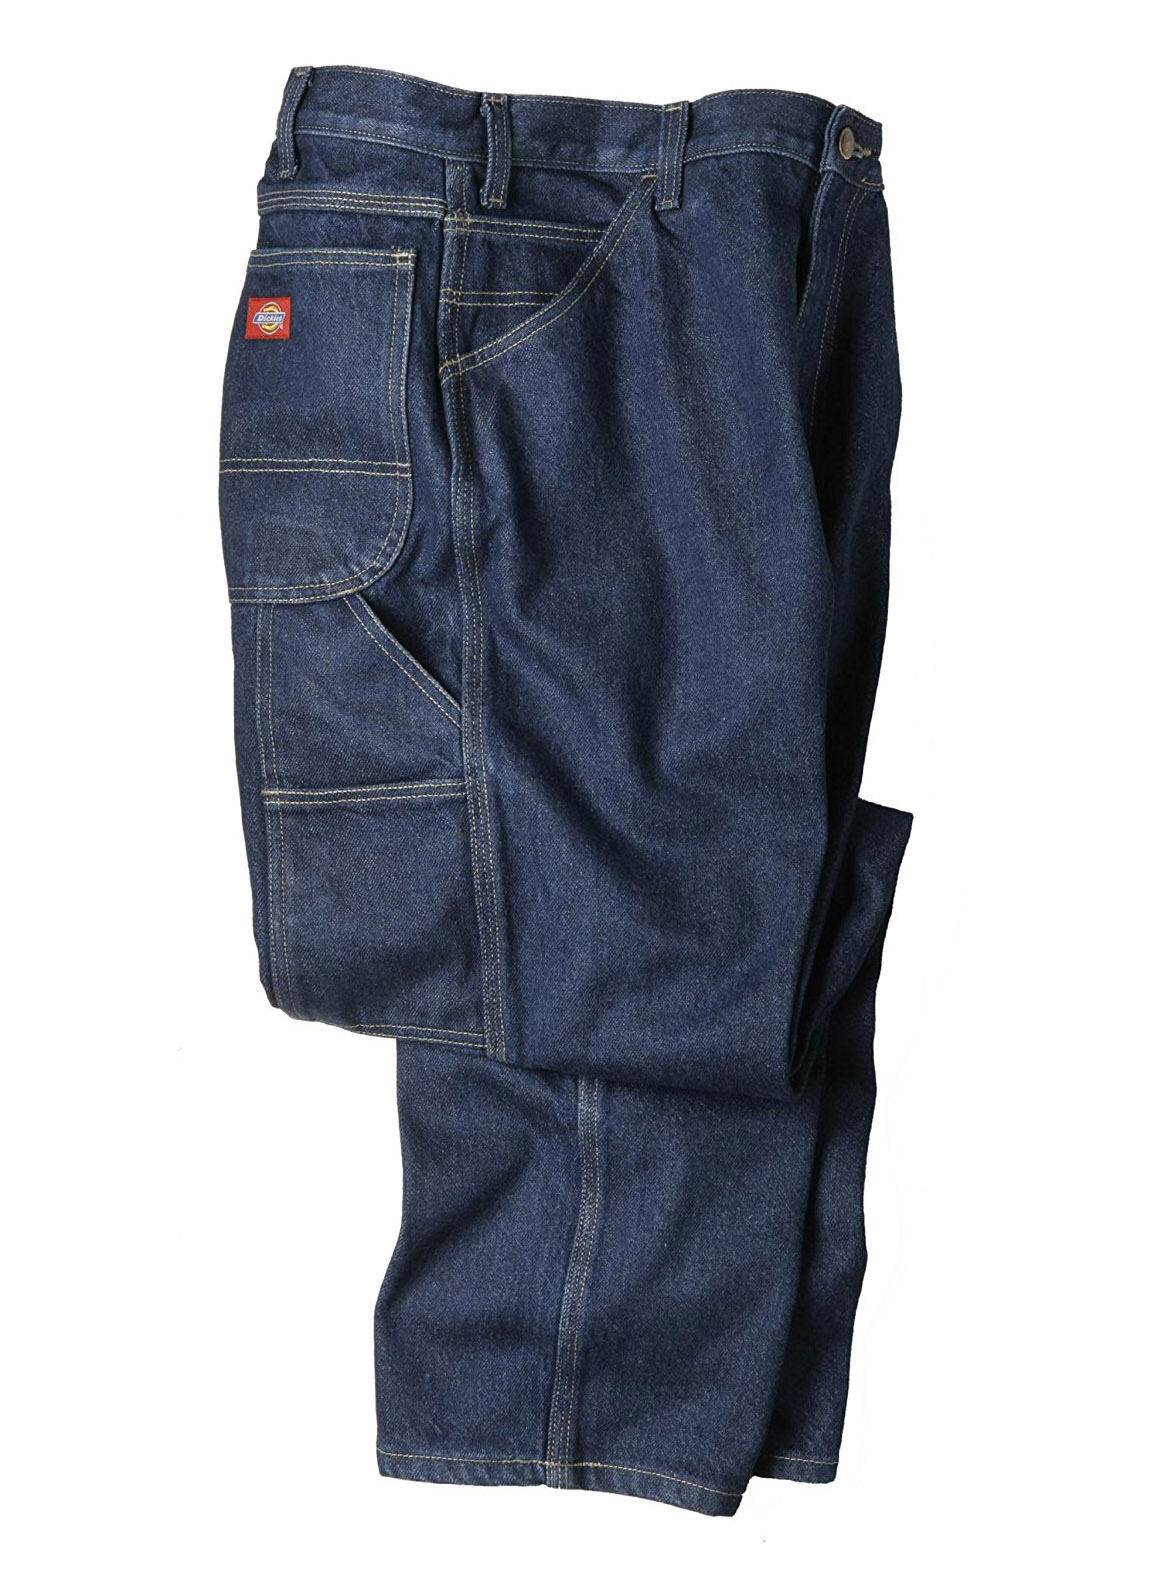 most durable work jeans